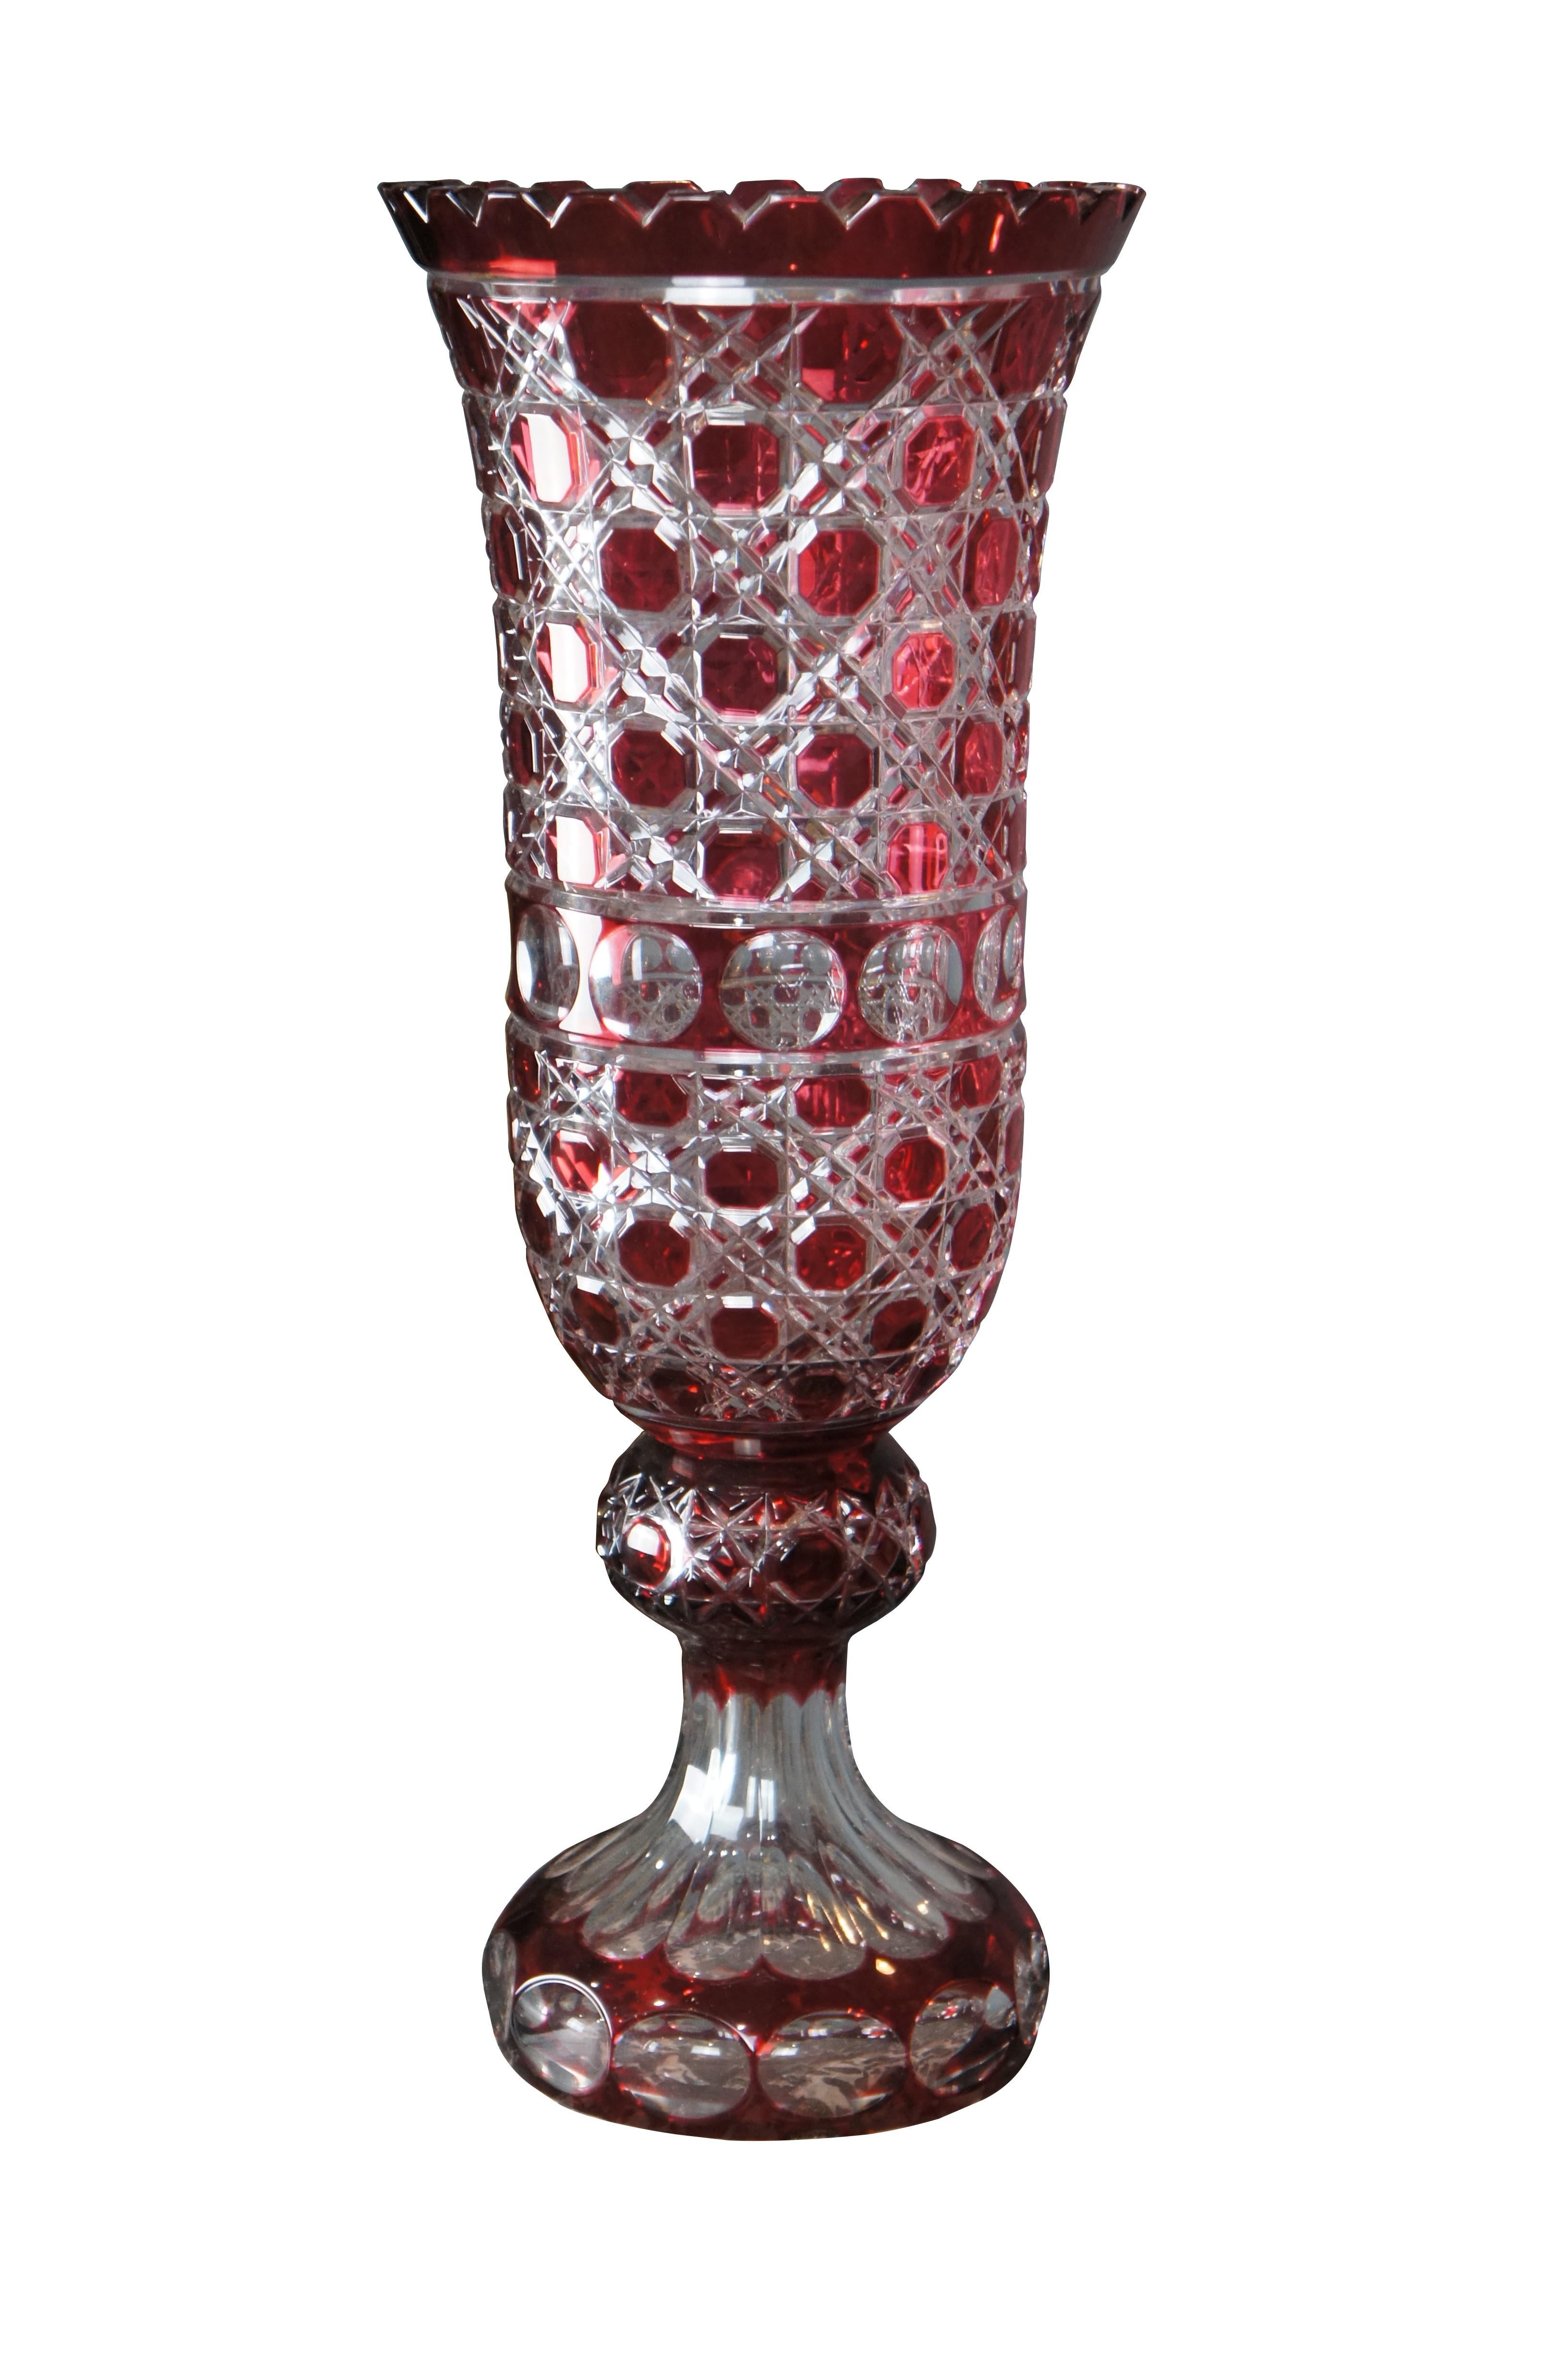 An impressive vintage Bohemian ruby cut to clear crystal vase. Features a coin dot and lattice pattern with sawtooth flared mouth. The vases is poised on a footed base.

Dimensions:
21